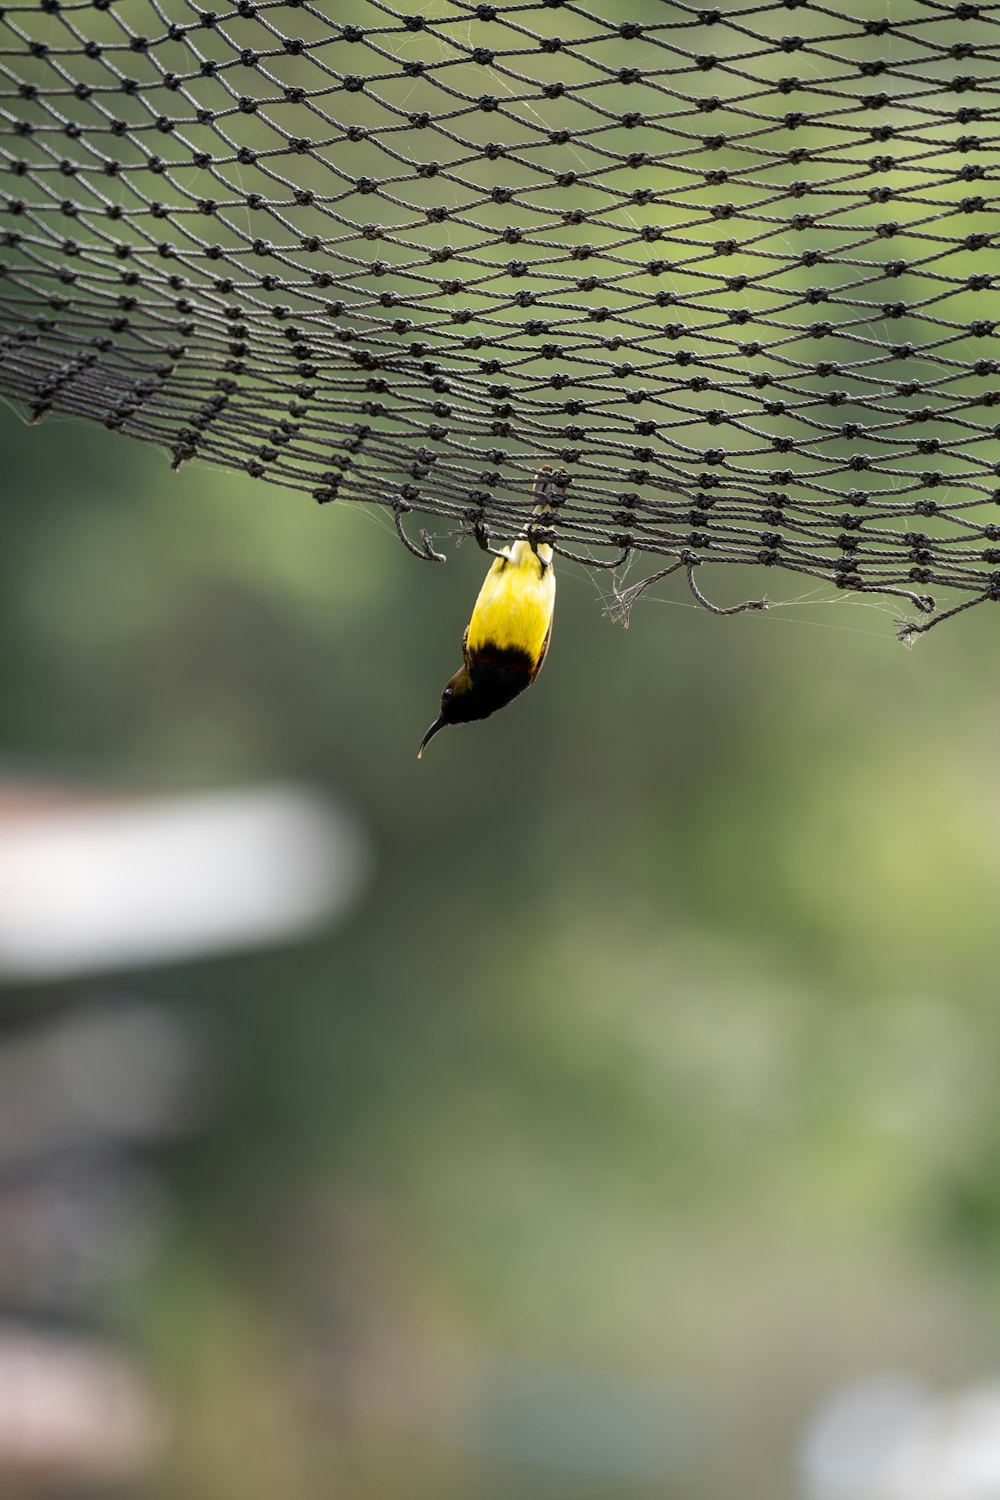 a yellow and black bird sitting on top of a net